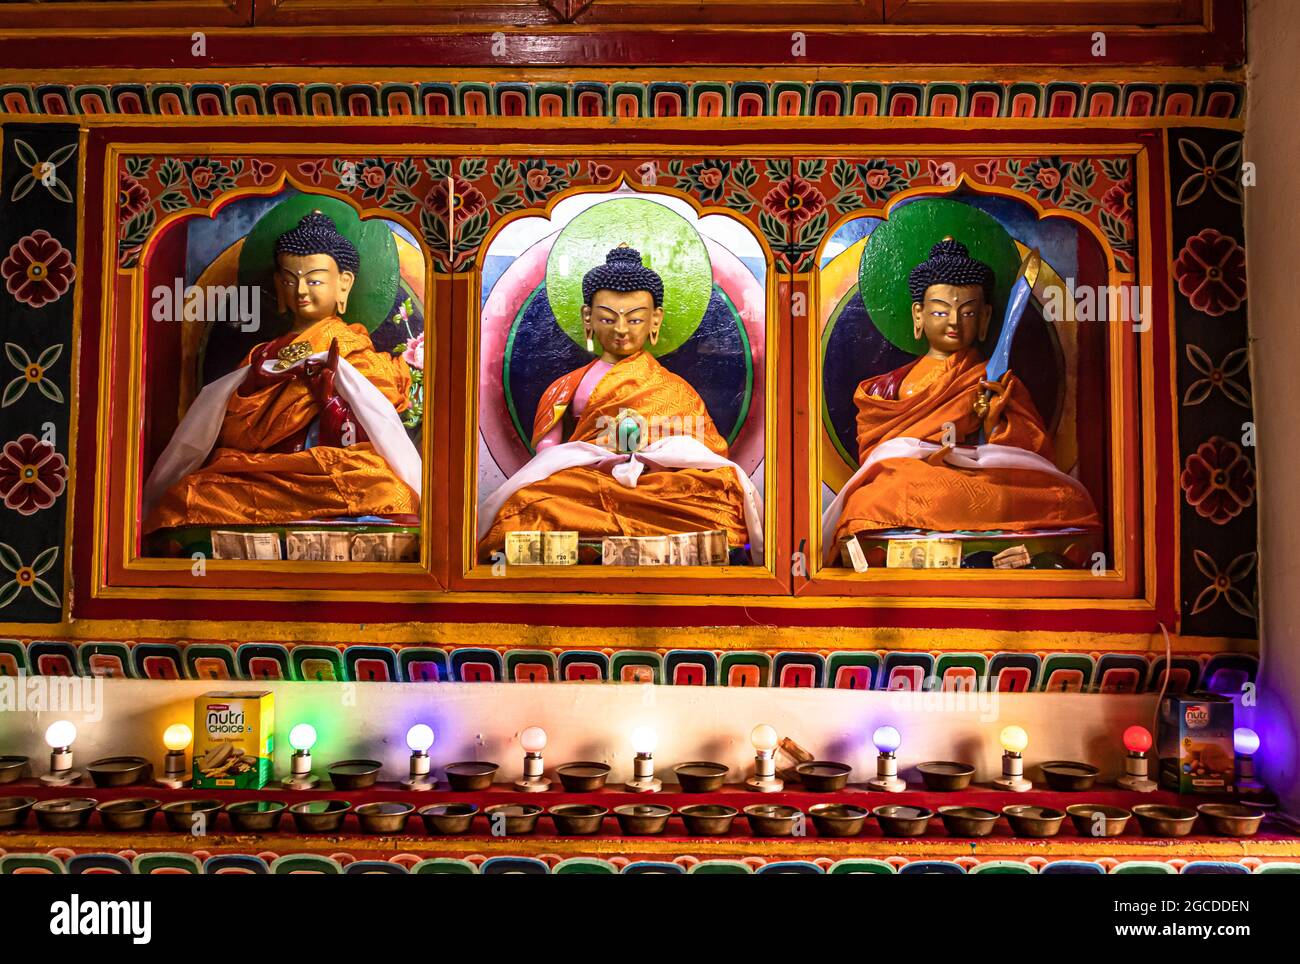 ancient buddhist monastery with Buddha statue and decorated wall from different angle image is taken at tawang monastery arunachal pradesh india. Stock Photo